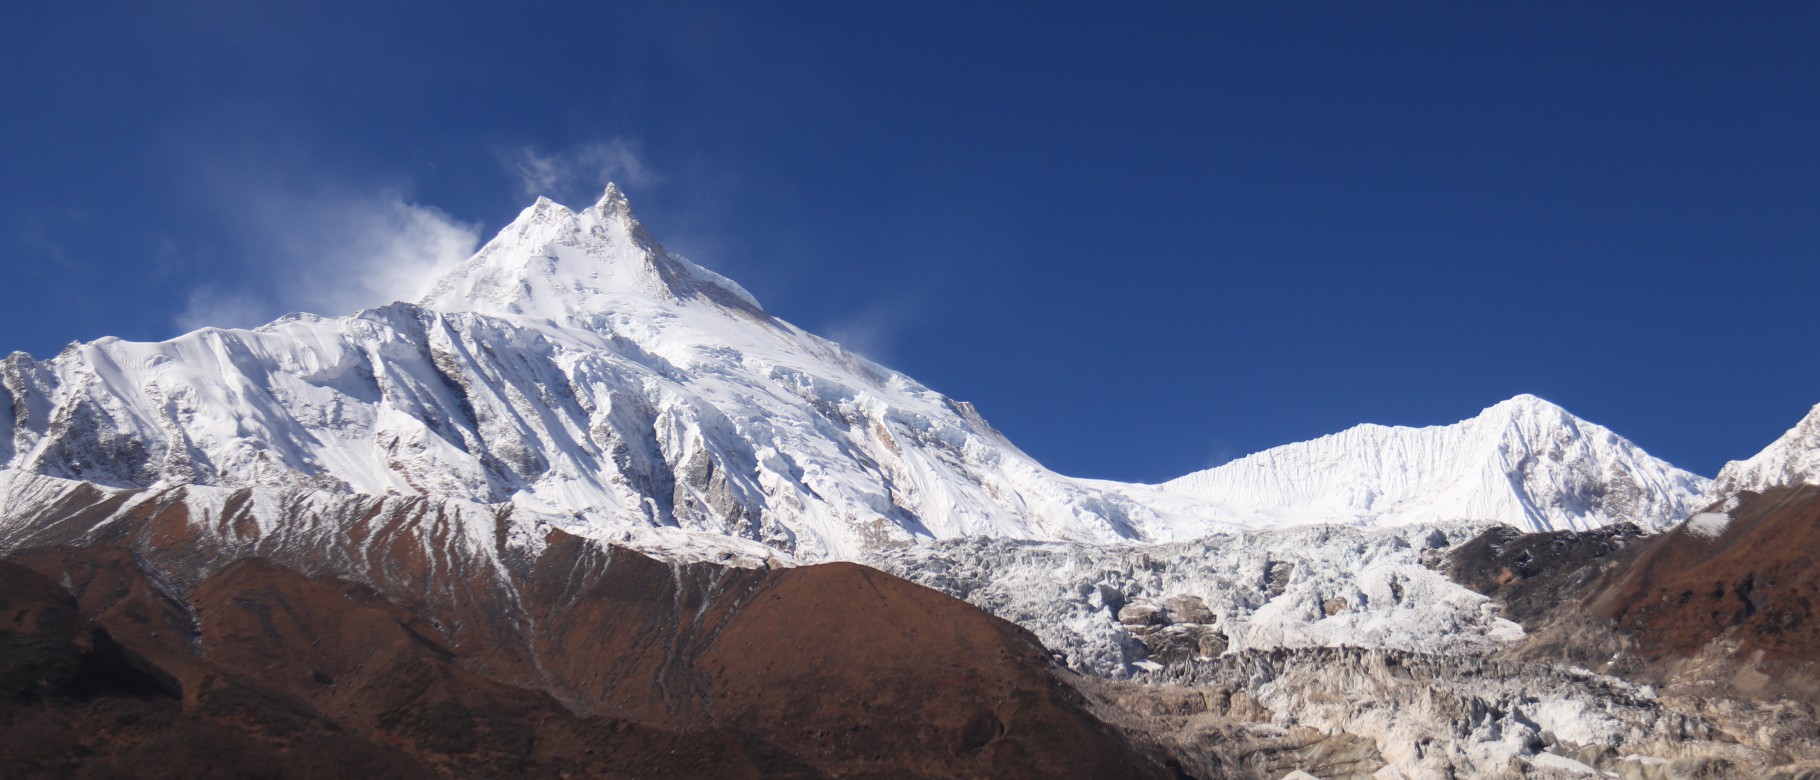 Photo of a snow-capped mountain in Nepal